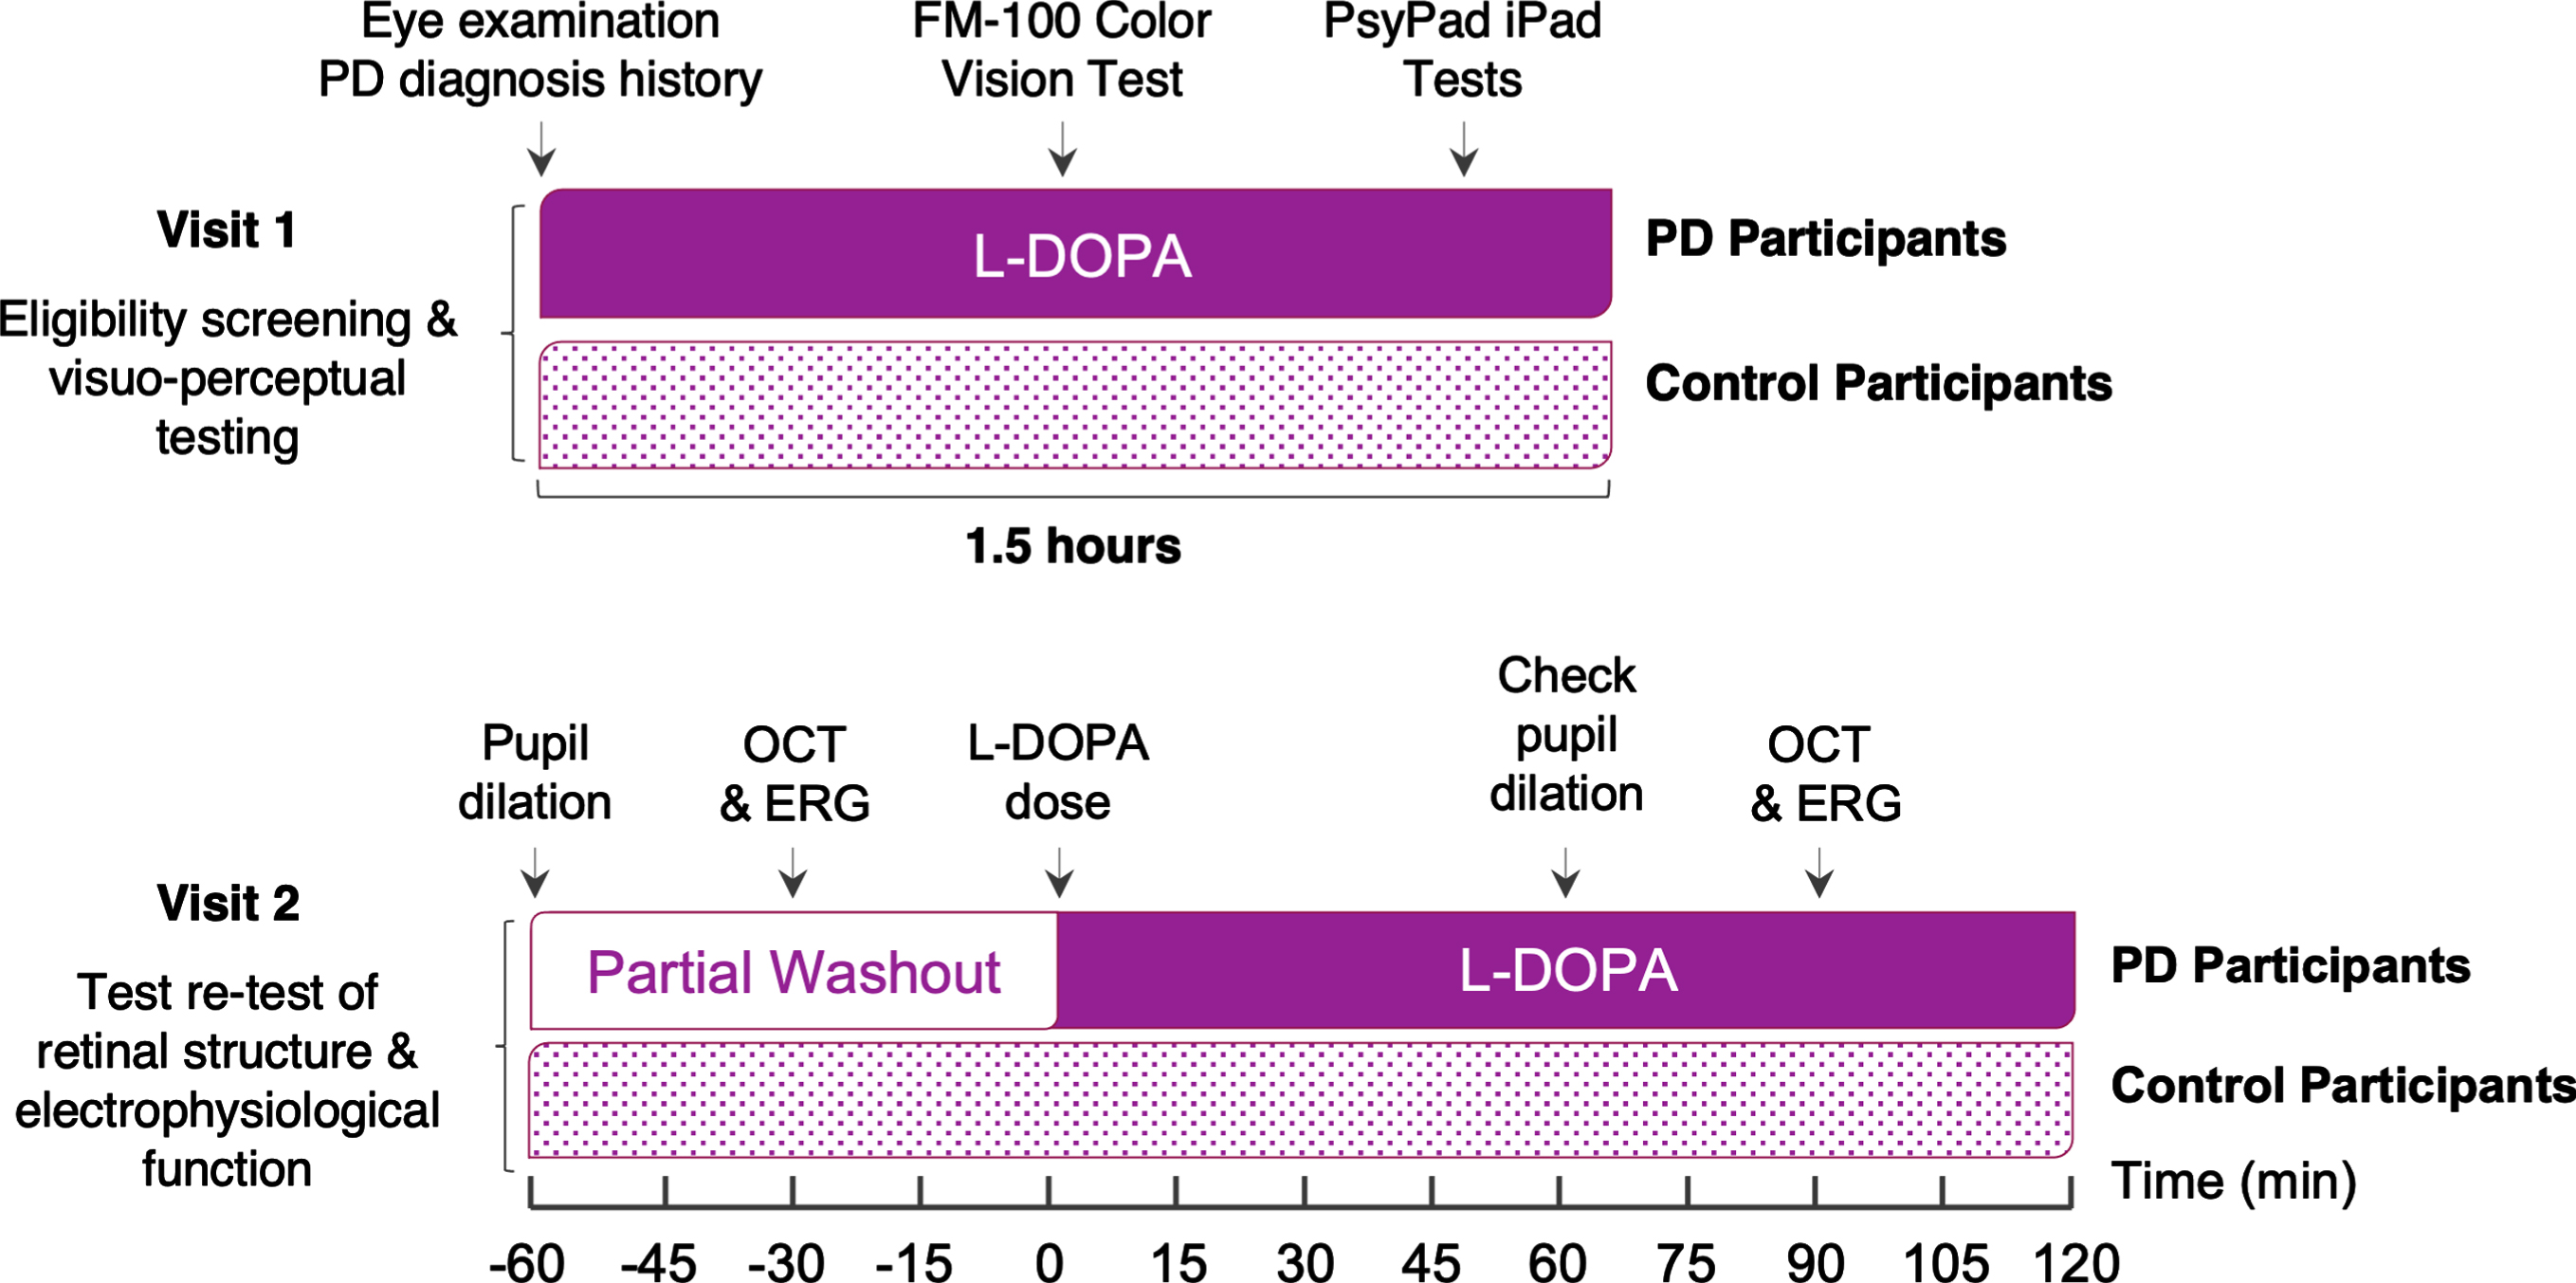 Study Experimental Design. PD, Parkinson’s disease; OCT, optical coherence tomography; ERG, electroretinography; L-DOPA, levodopa. The timeline of each visit depicts L-DOPA status of Parkinson’s disease participants during visual assessments.